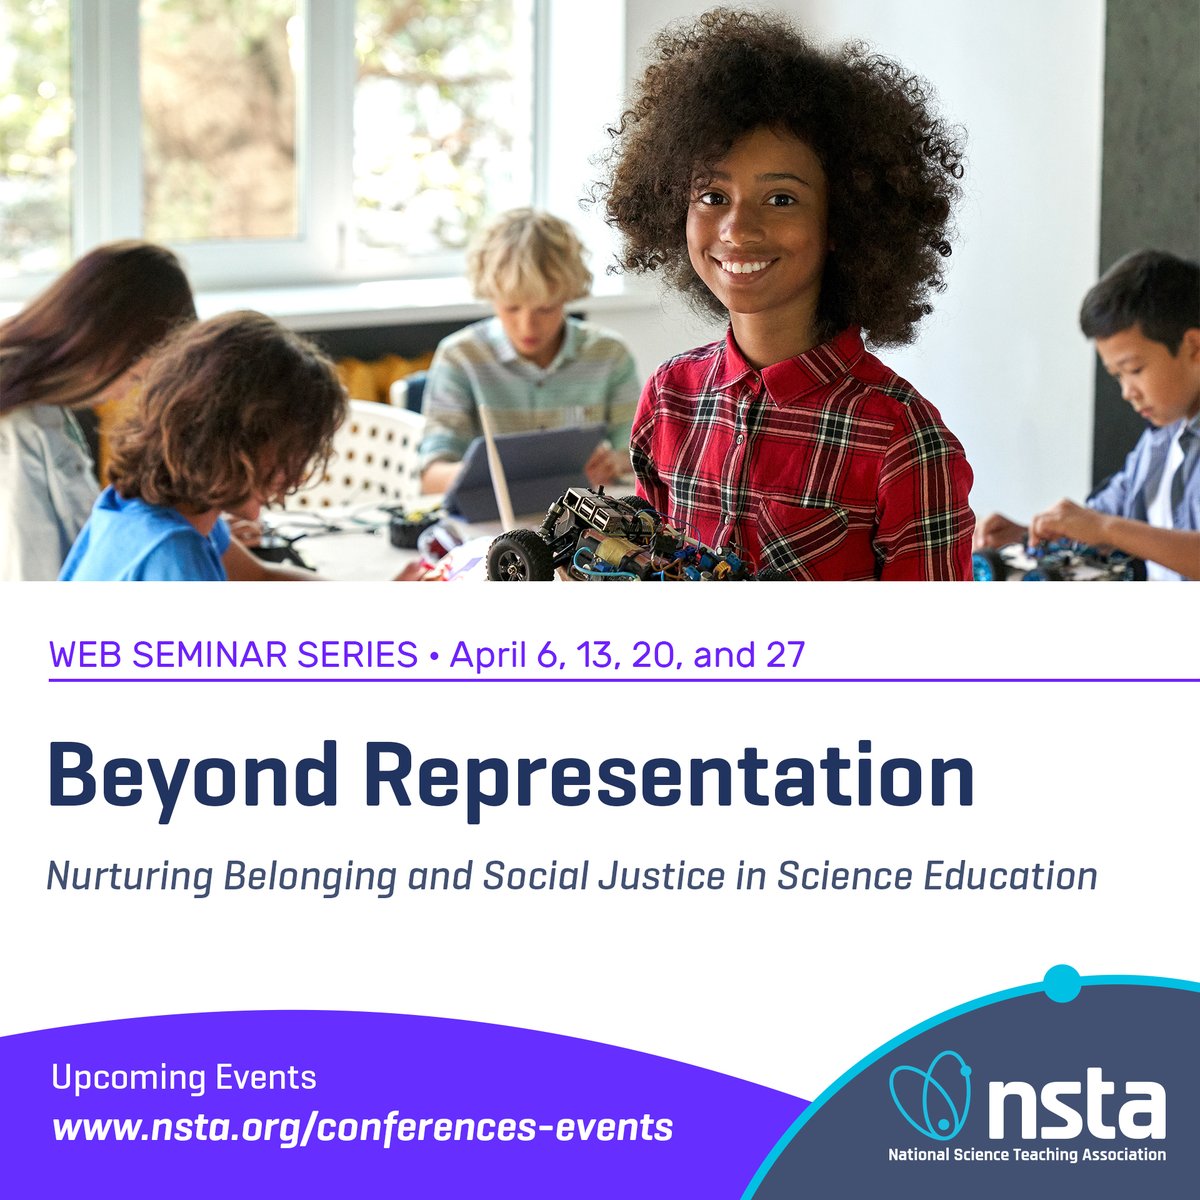 Join us TODAY for this four-part, interactive, web seminar series. Explore strategies for implementing social justice principles and practices in the classroom and discuss how to create more inclusive science learning experiences for students. Register at bit.ly/43GBCZA